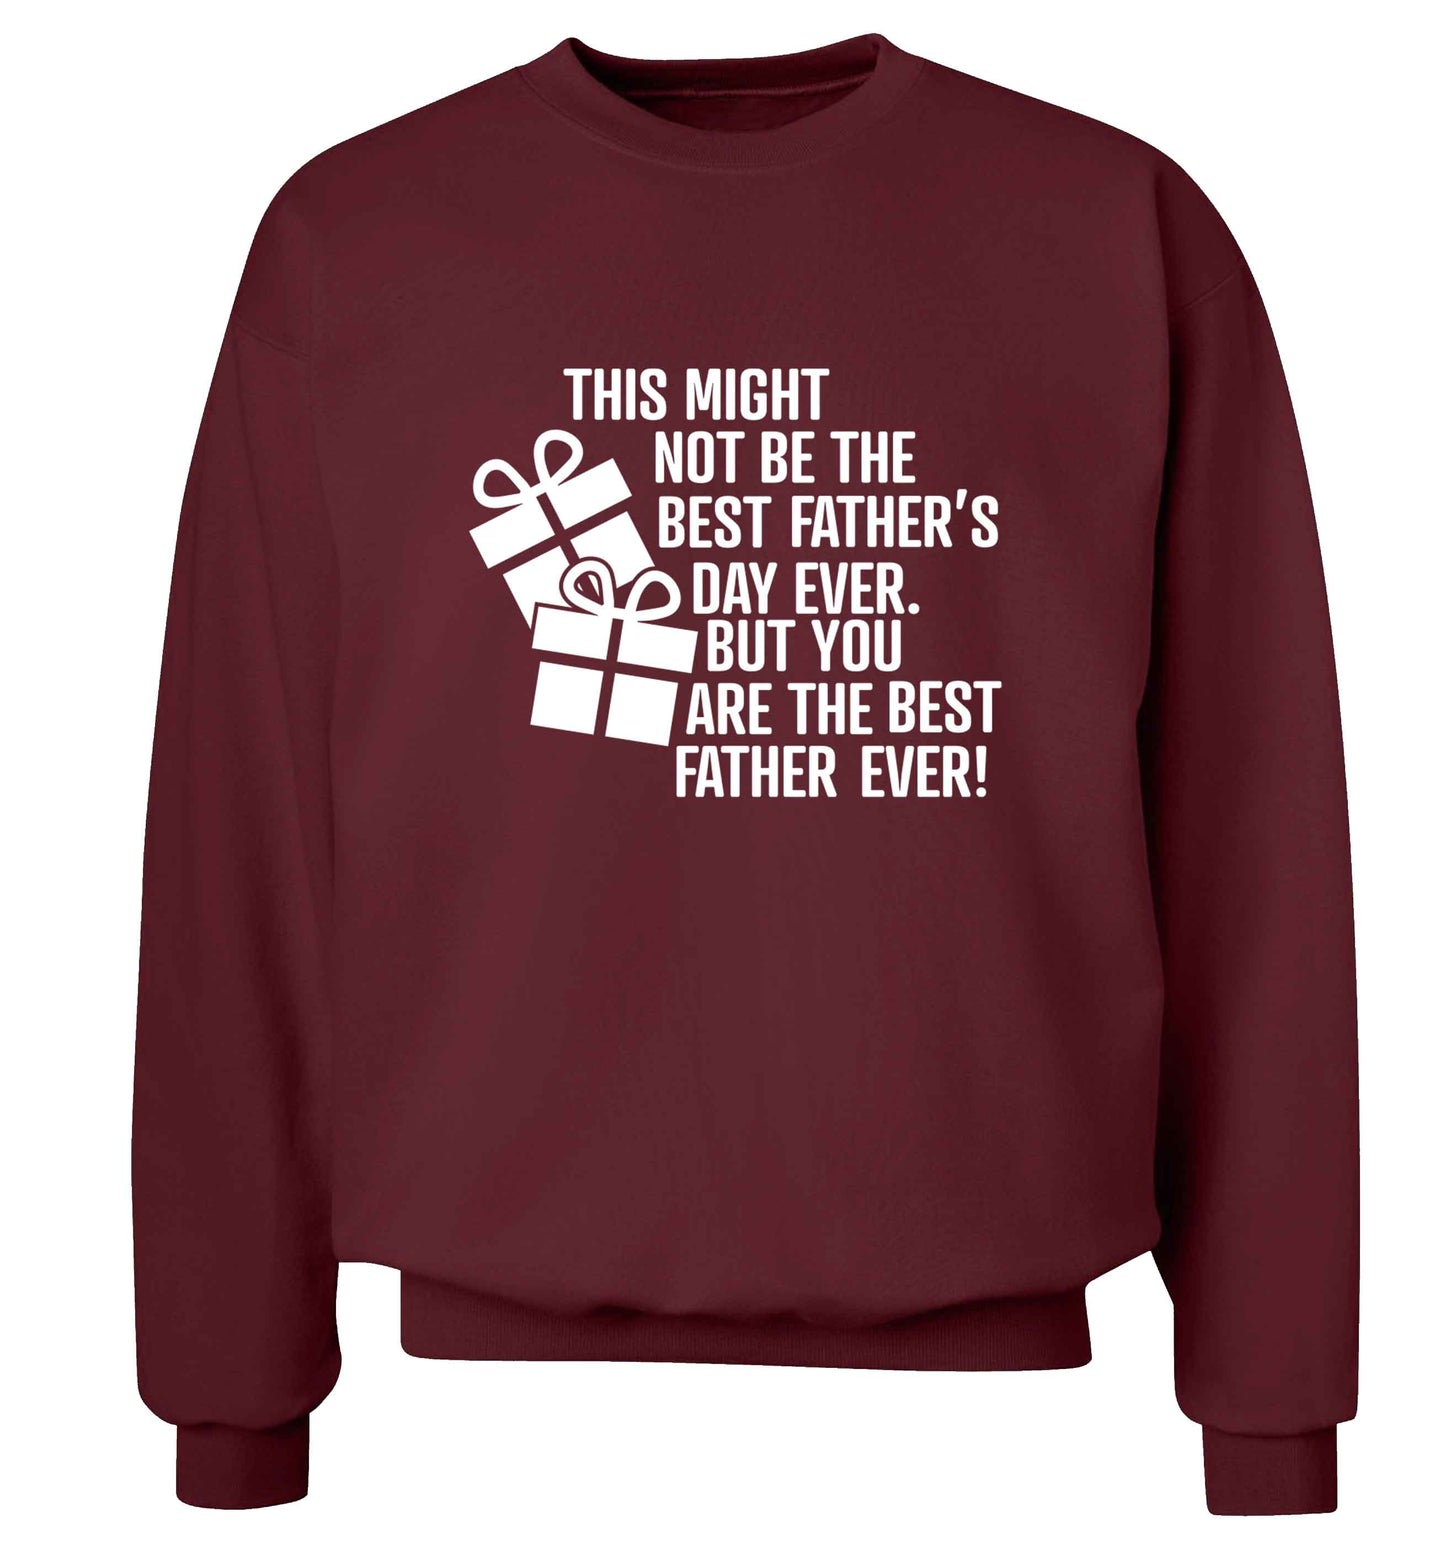 It might not be the best Father's Day ever but you are the best father ever! adult's unisex maroon sweater 2XL